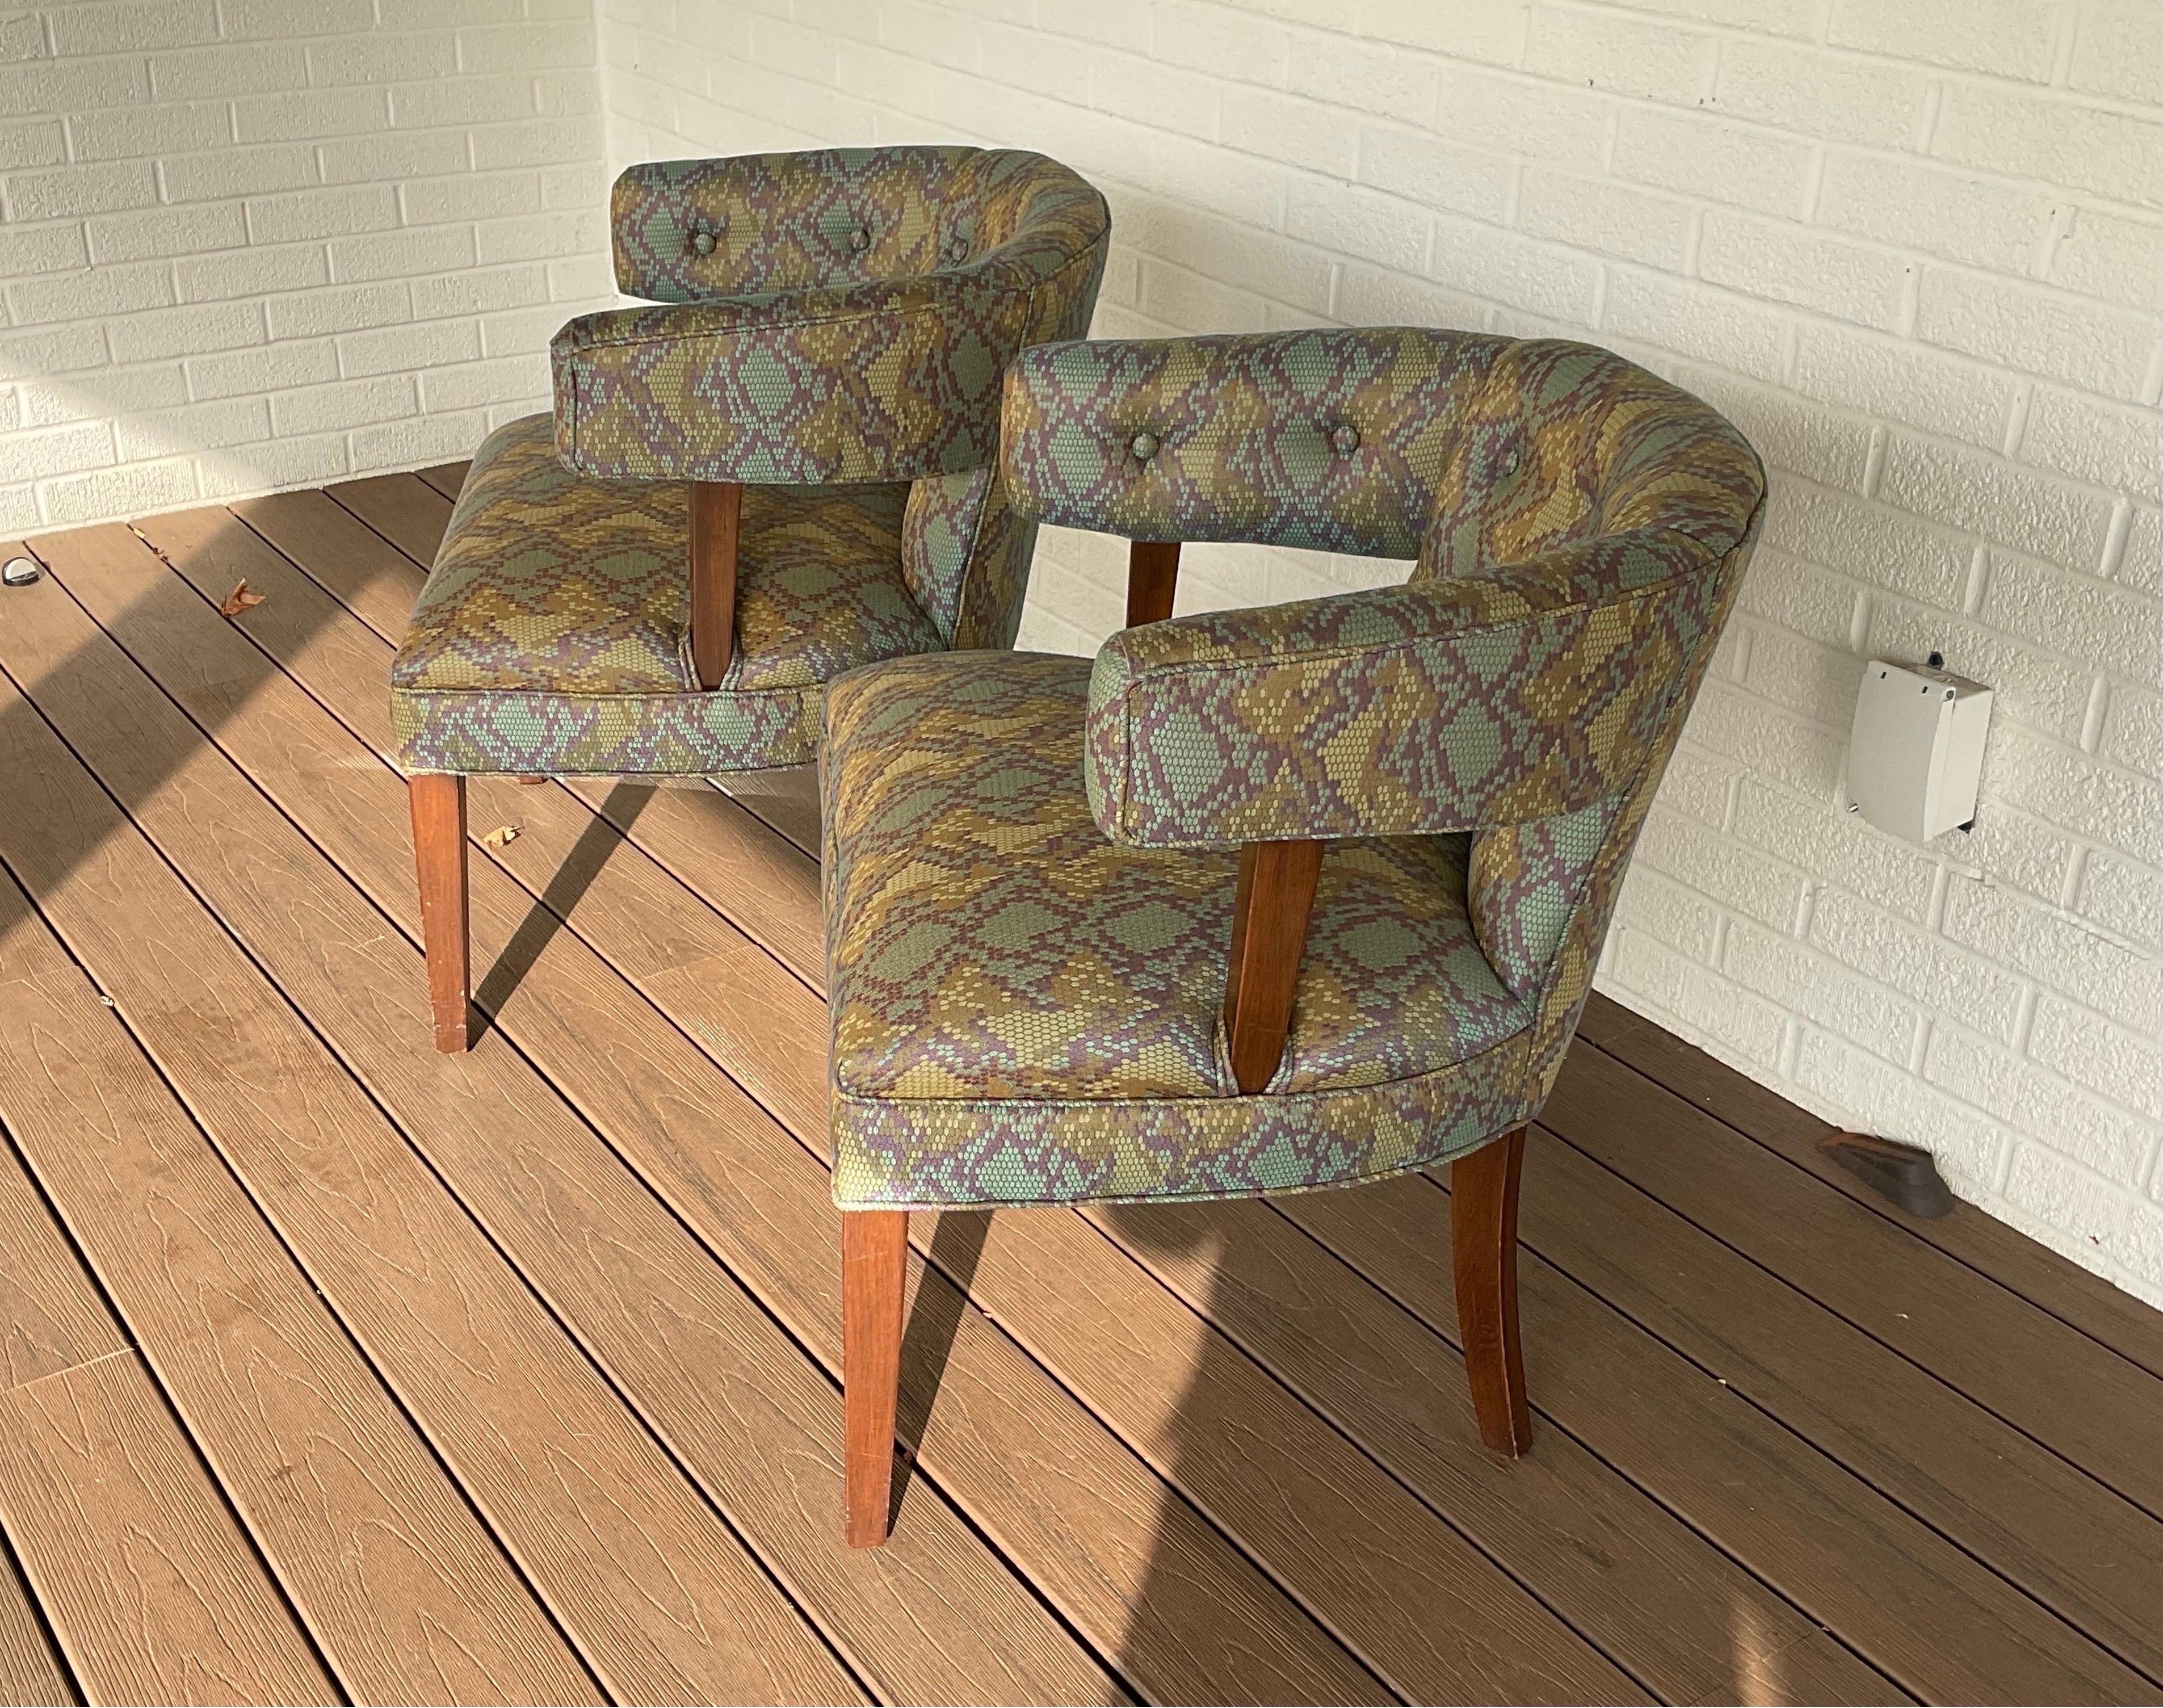 Fresh from a complete renovation and wrapped in the most decadent Lee Jofa snakeskin pattern upholstery fabric. Aqua, violet, copper and green come together in spectacular fashion on these Uber cool vintage side chairs.